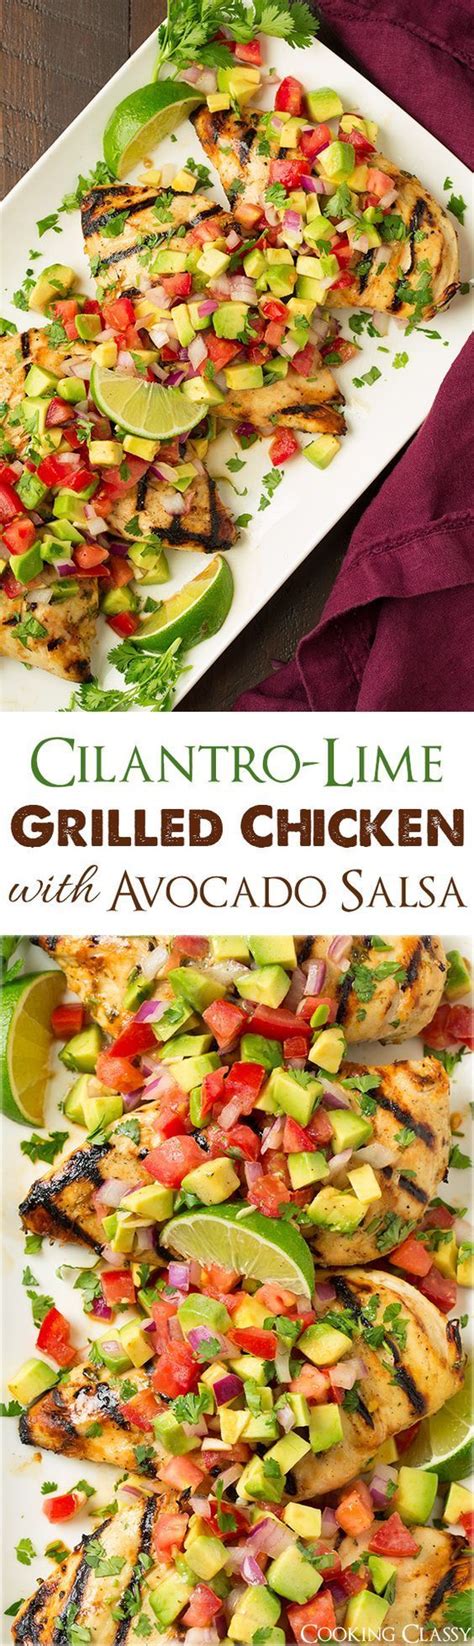 1/2 avocado, pitted, peeled and diced. Grilled Cilantro Lime Chicken with Avocado Salsa - easy to ...